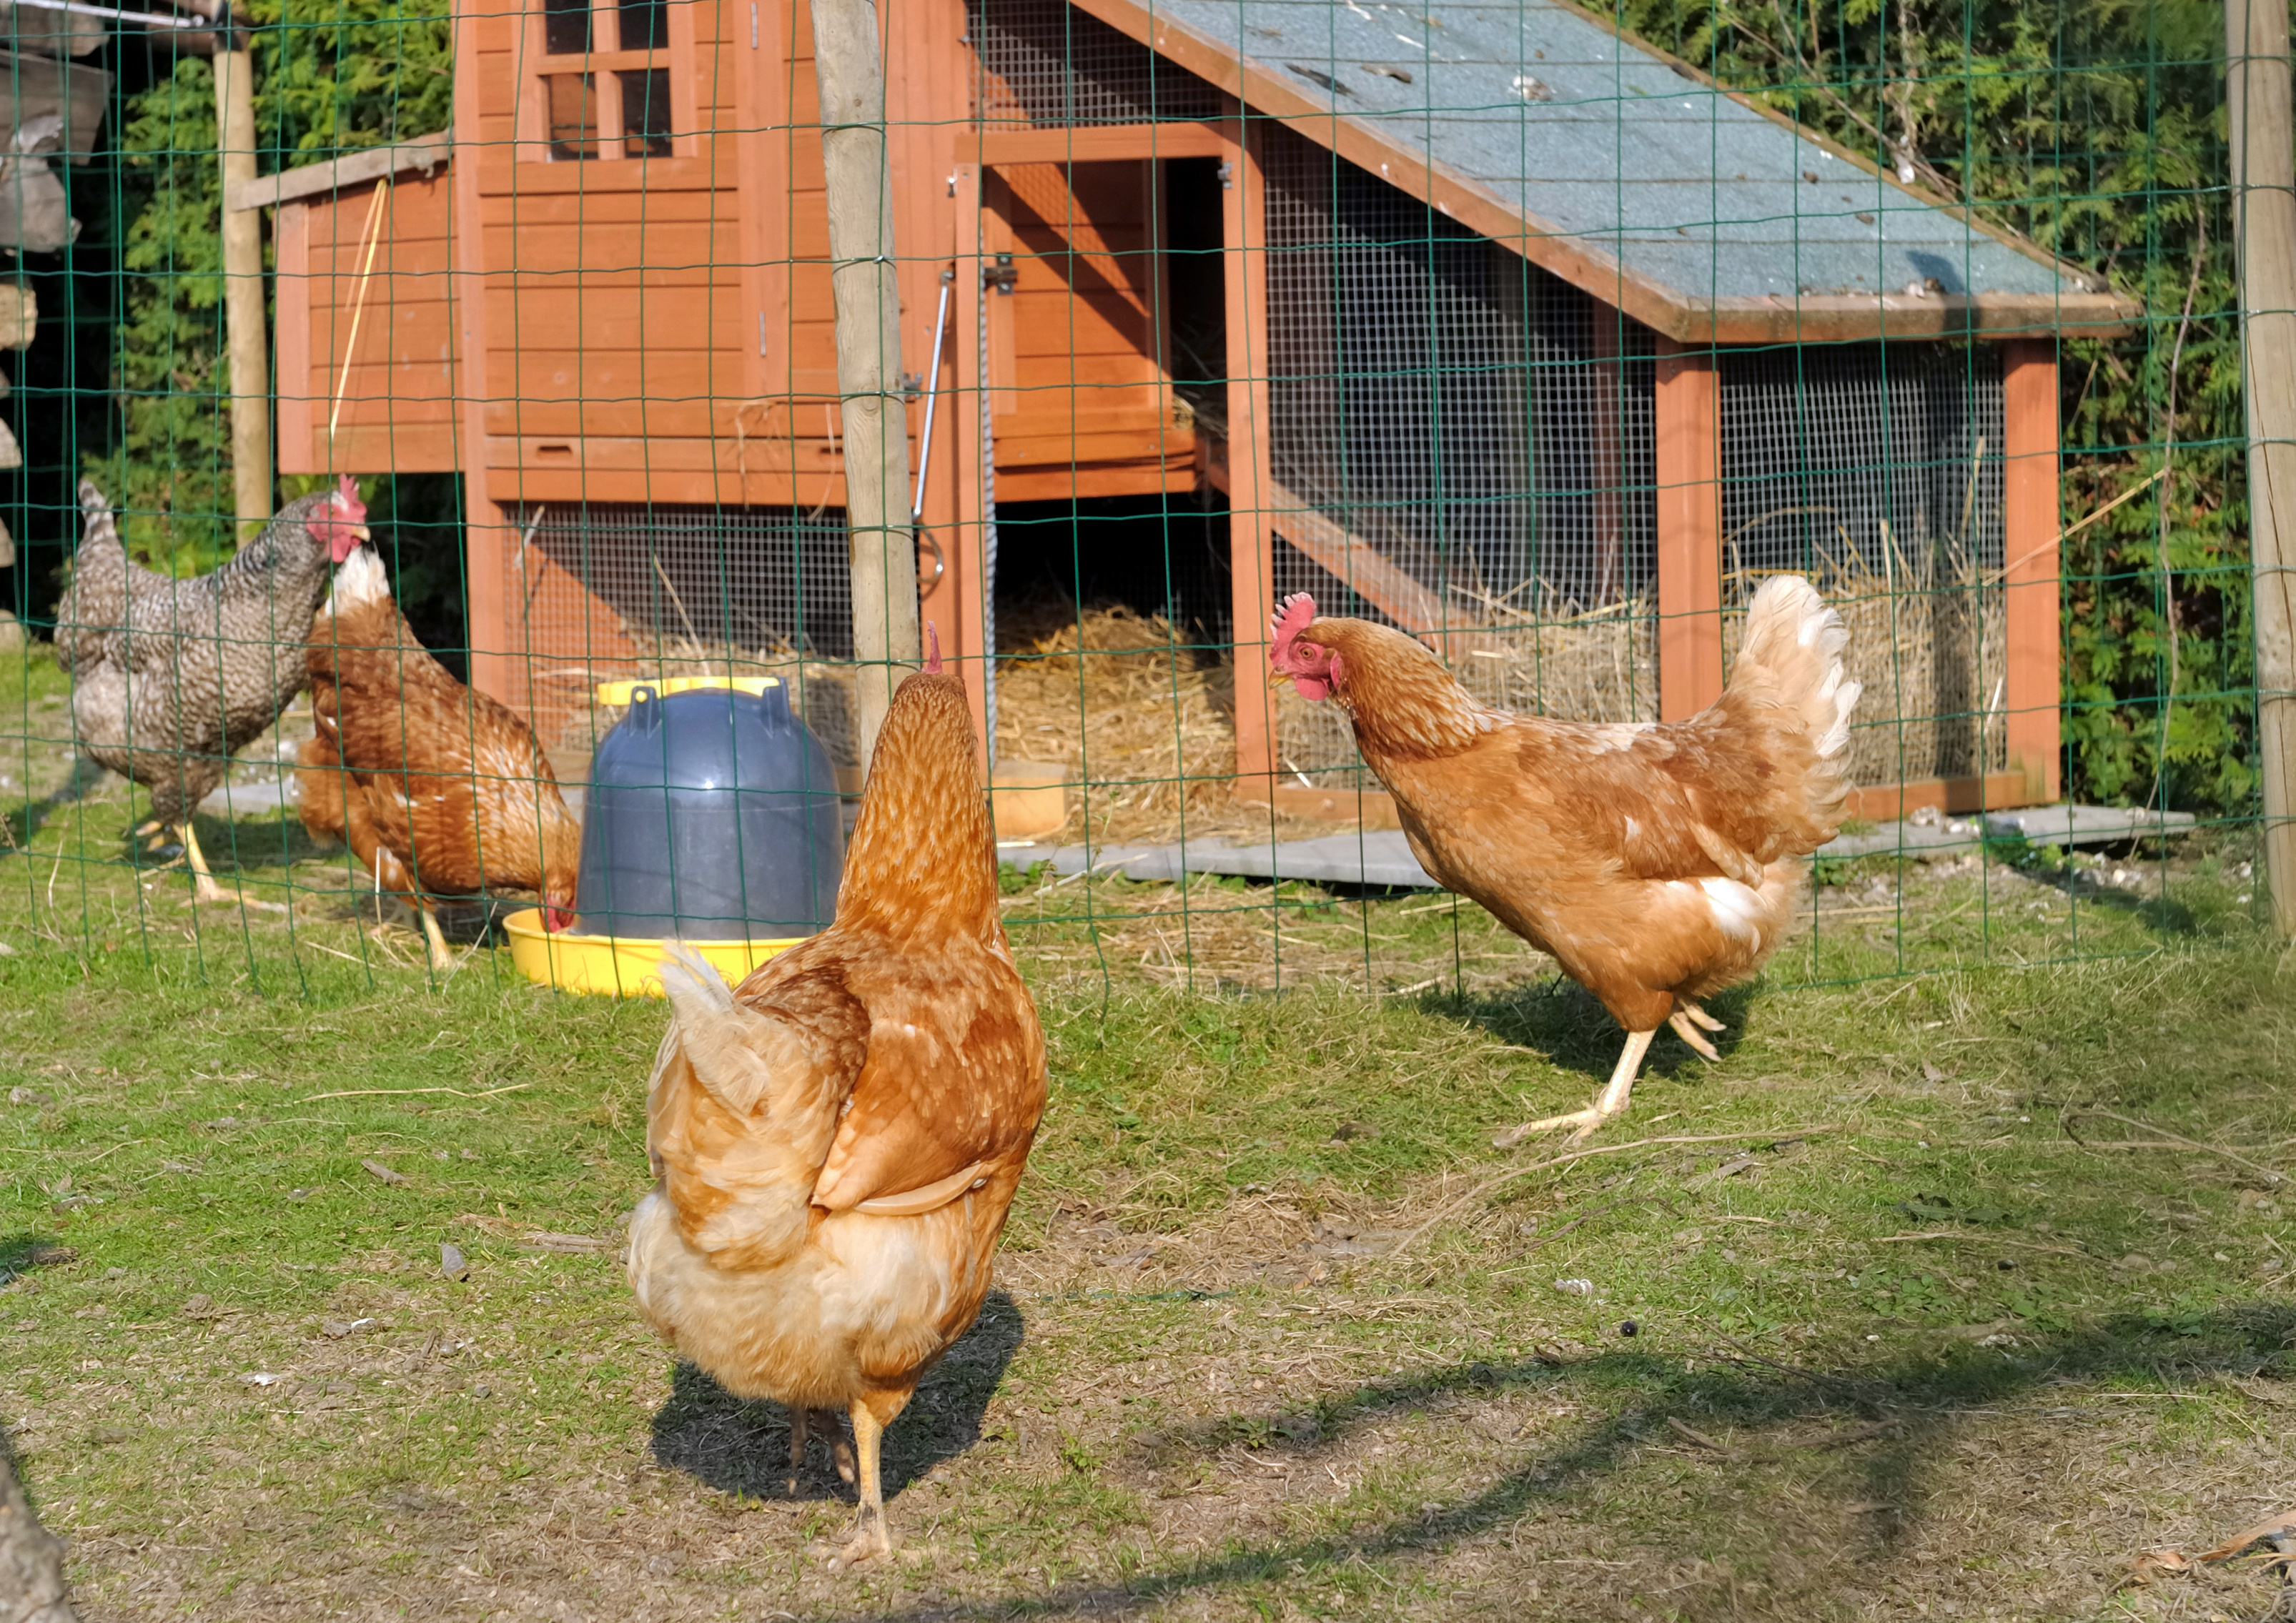 Beginner's guide to building your first chicken coop